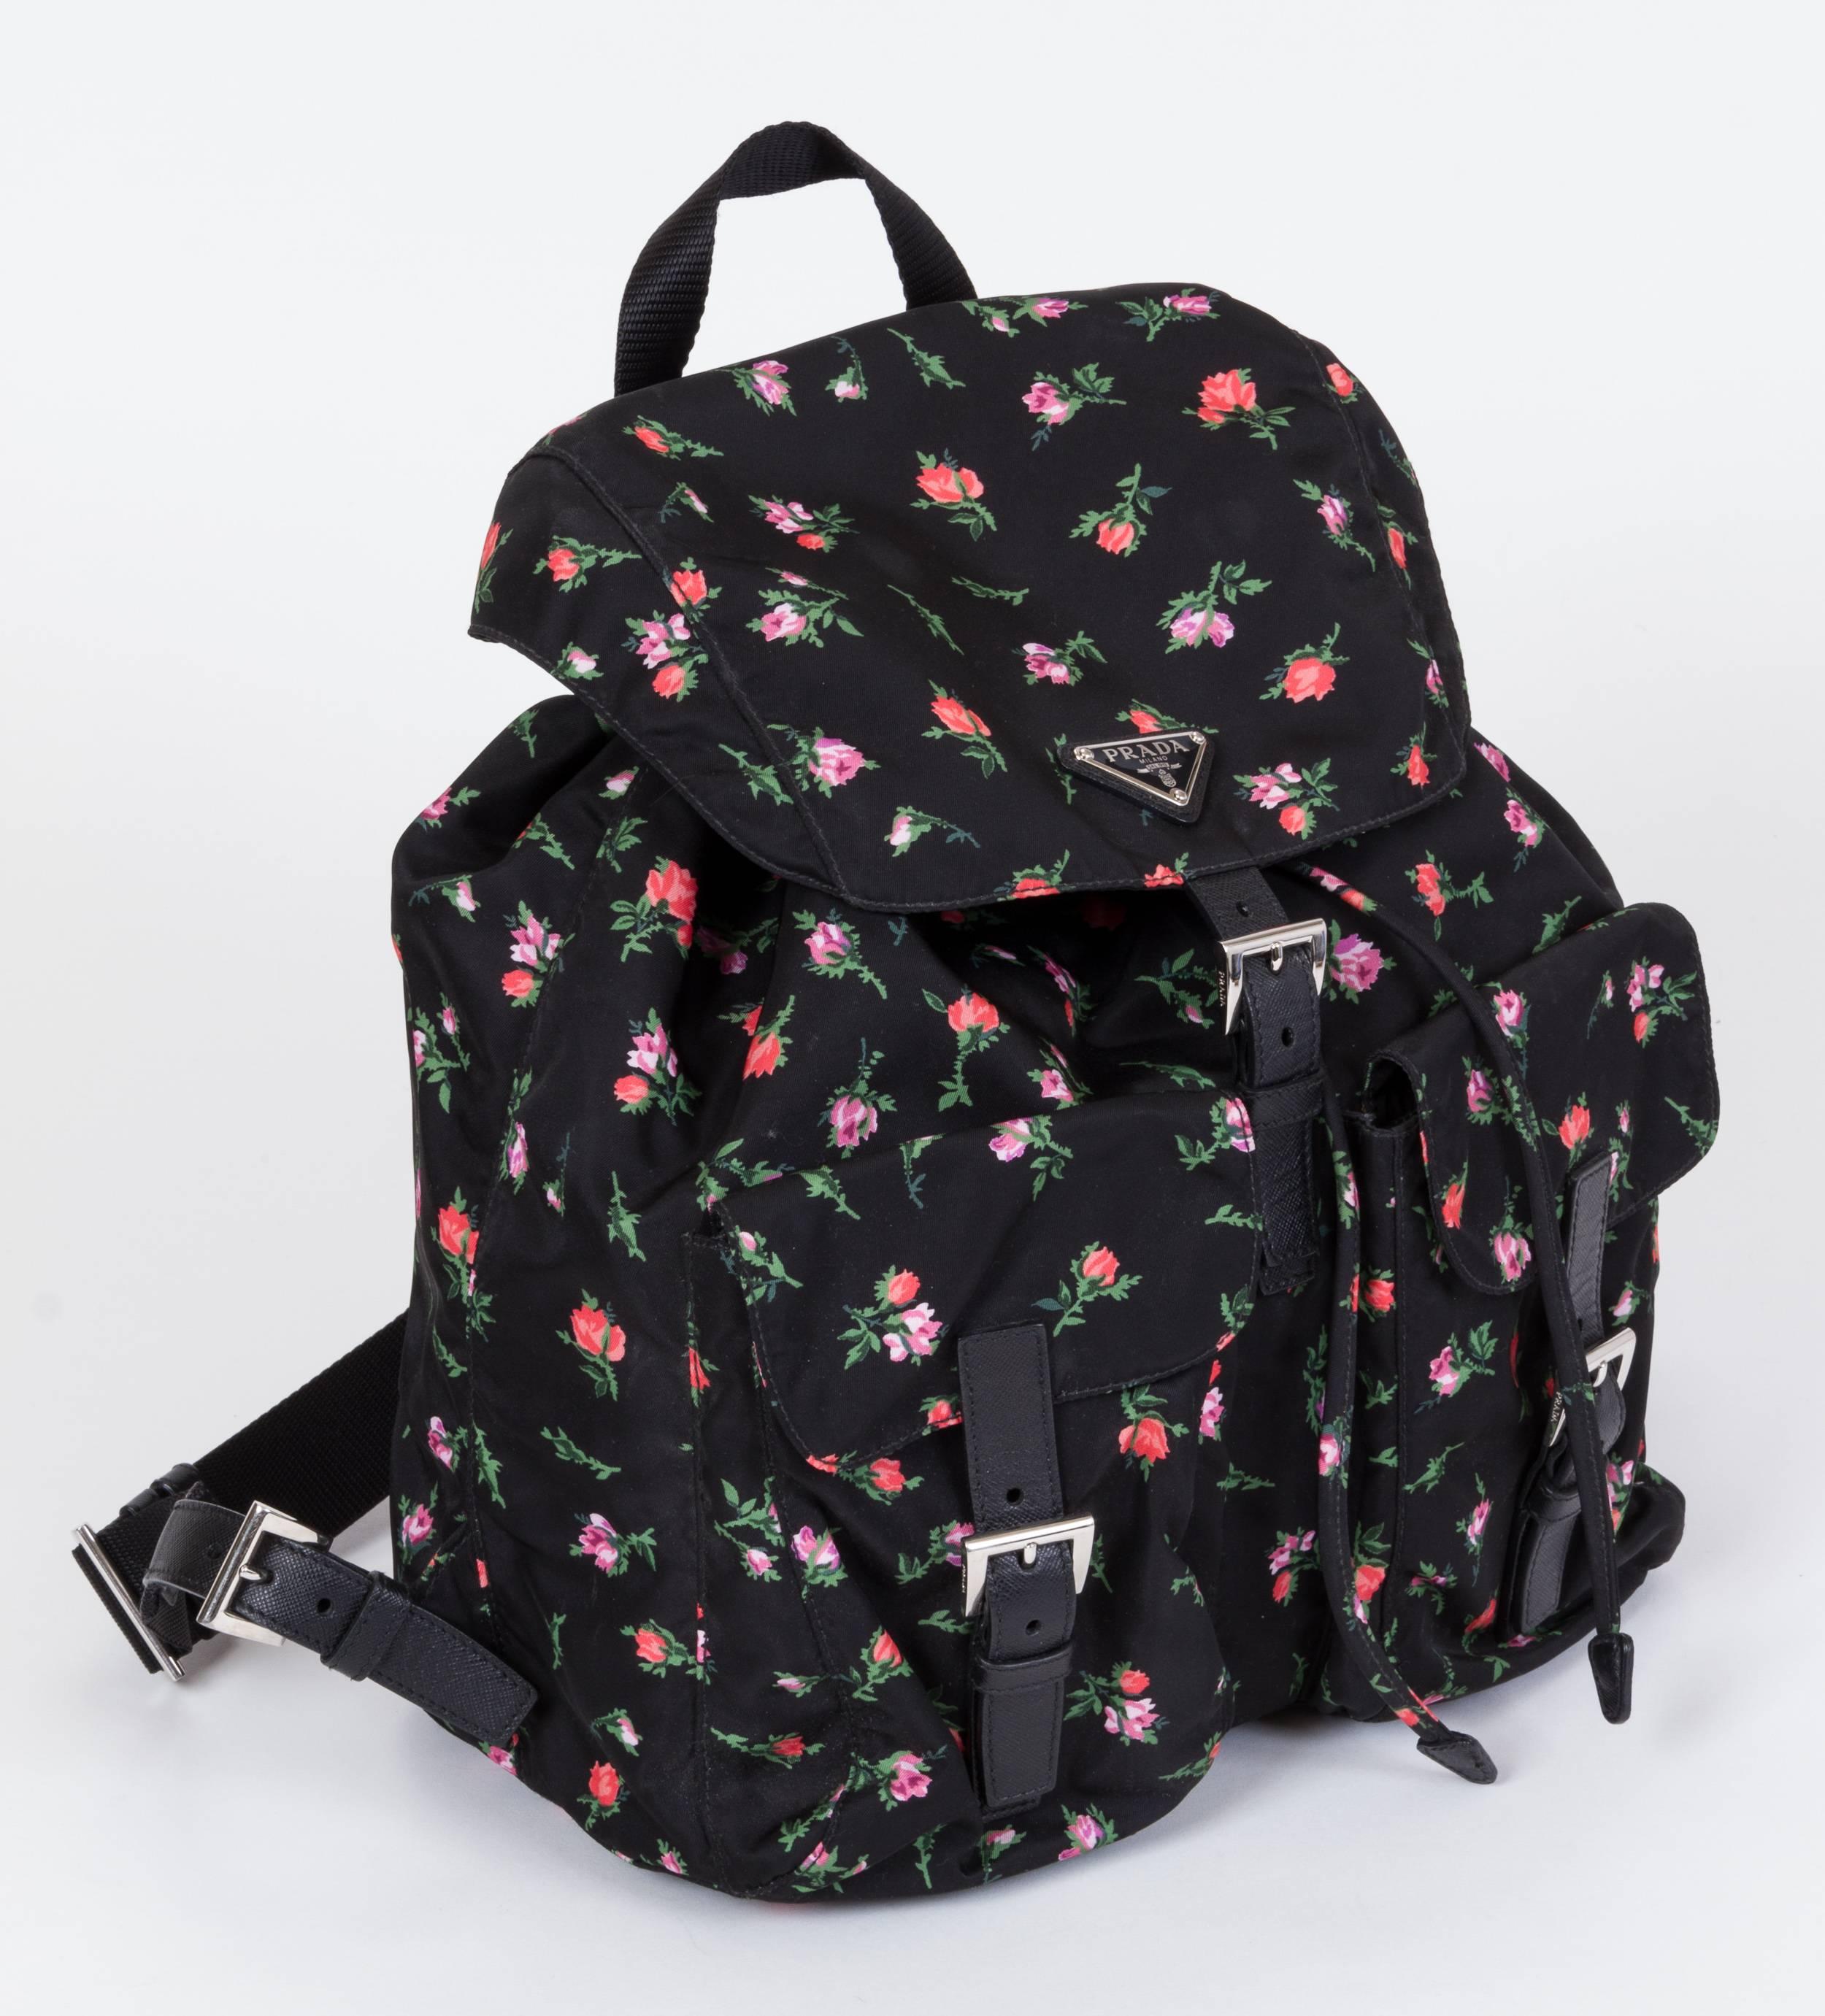 Prada black nylon backpack with pink rosettes and saffron leather details. Handle drop 3